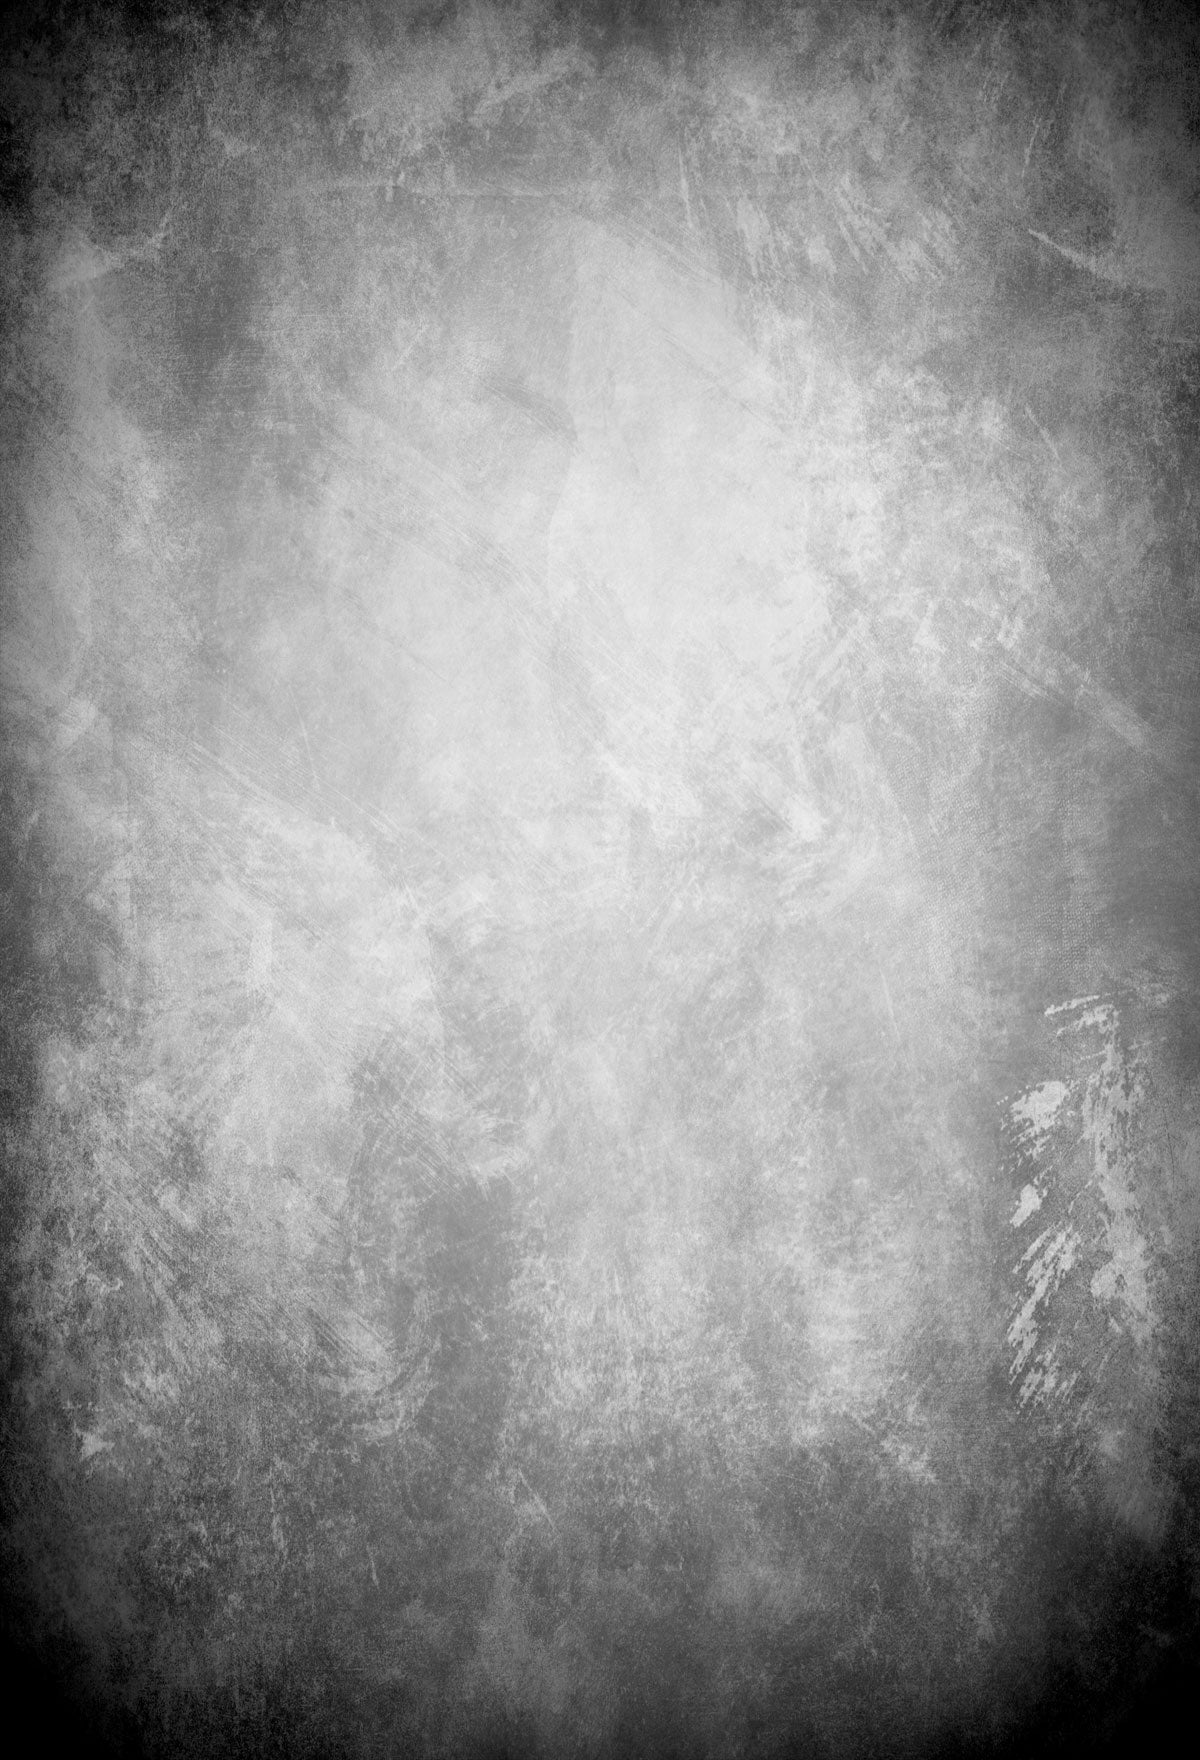 Kate Abstract Dark Middle White Texture Backdrops for Photography - Kate backdrops UK